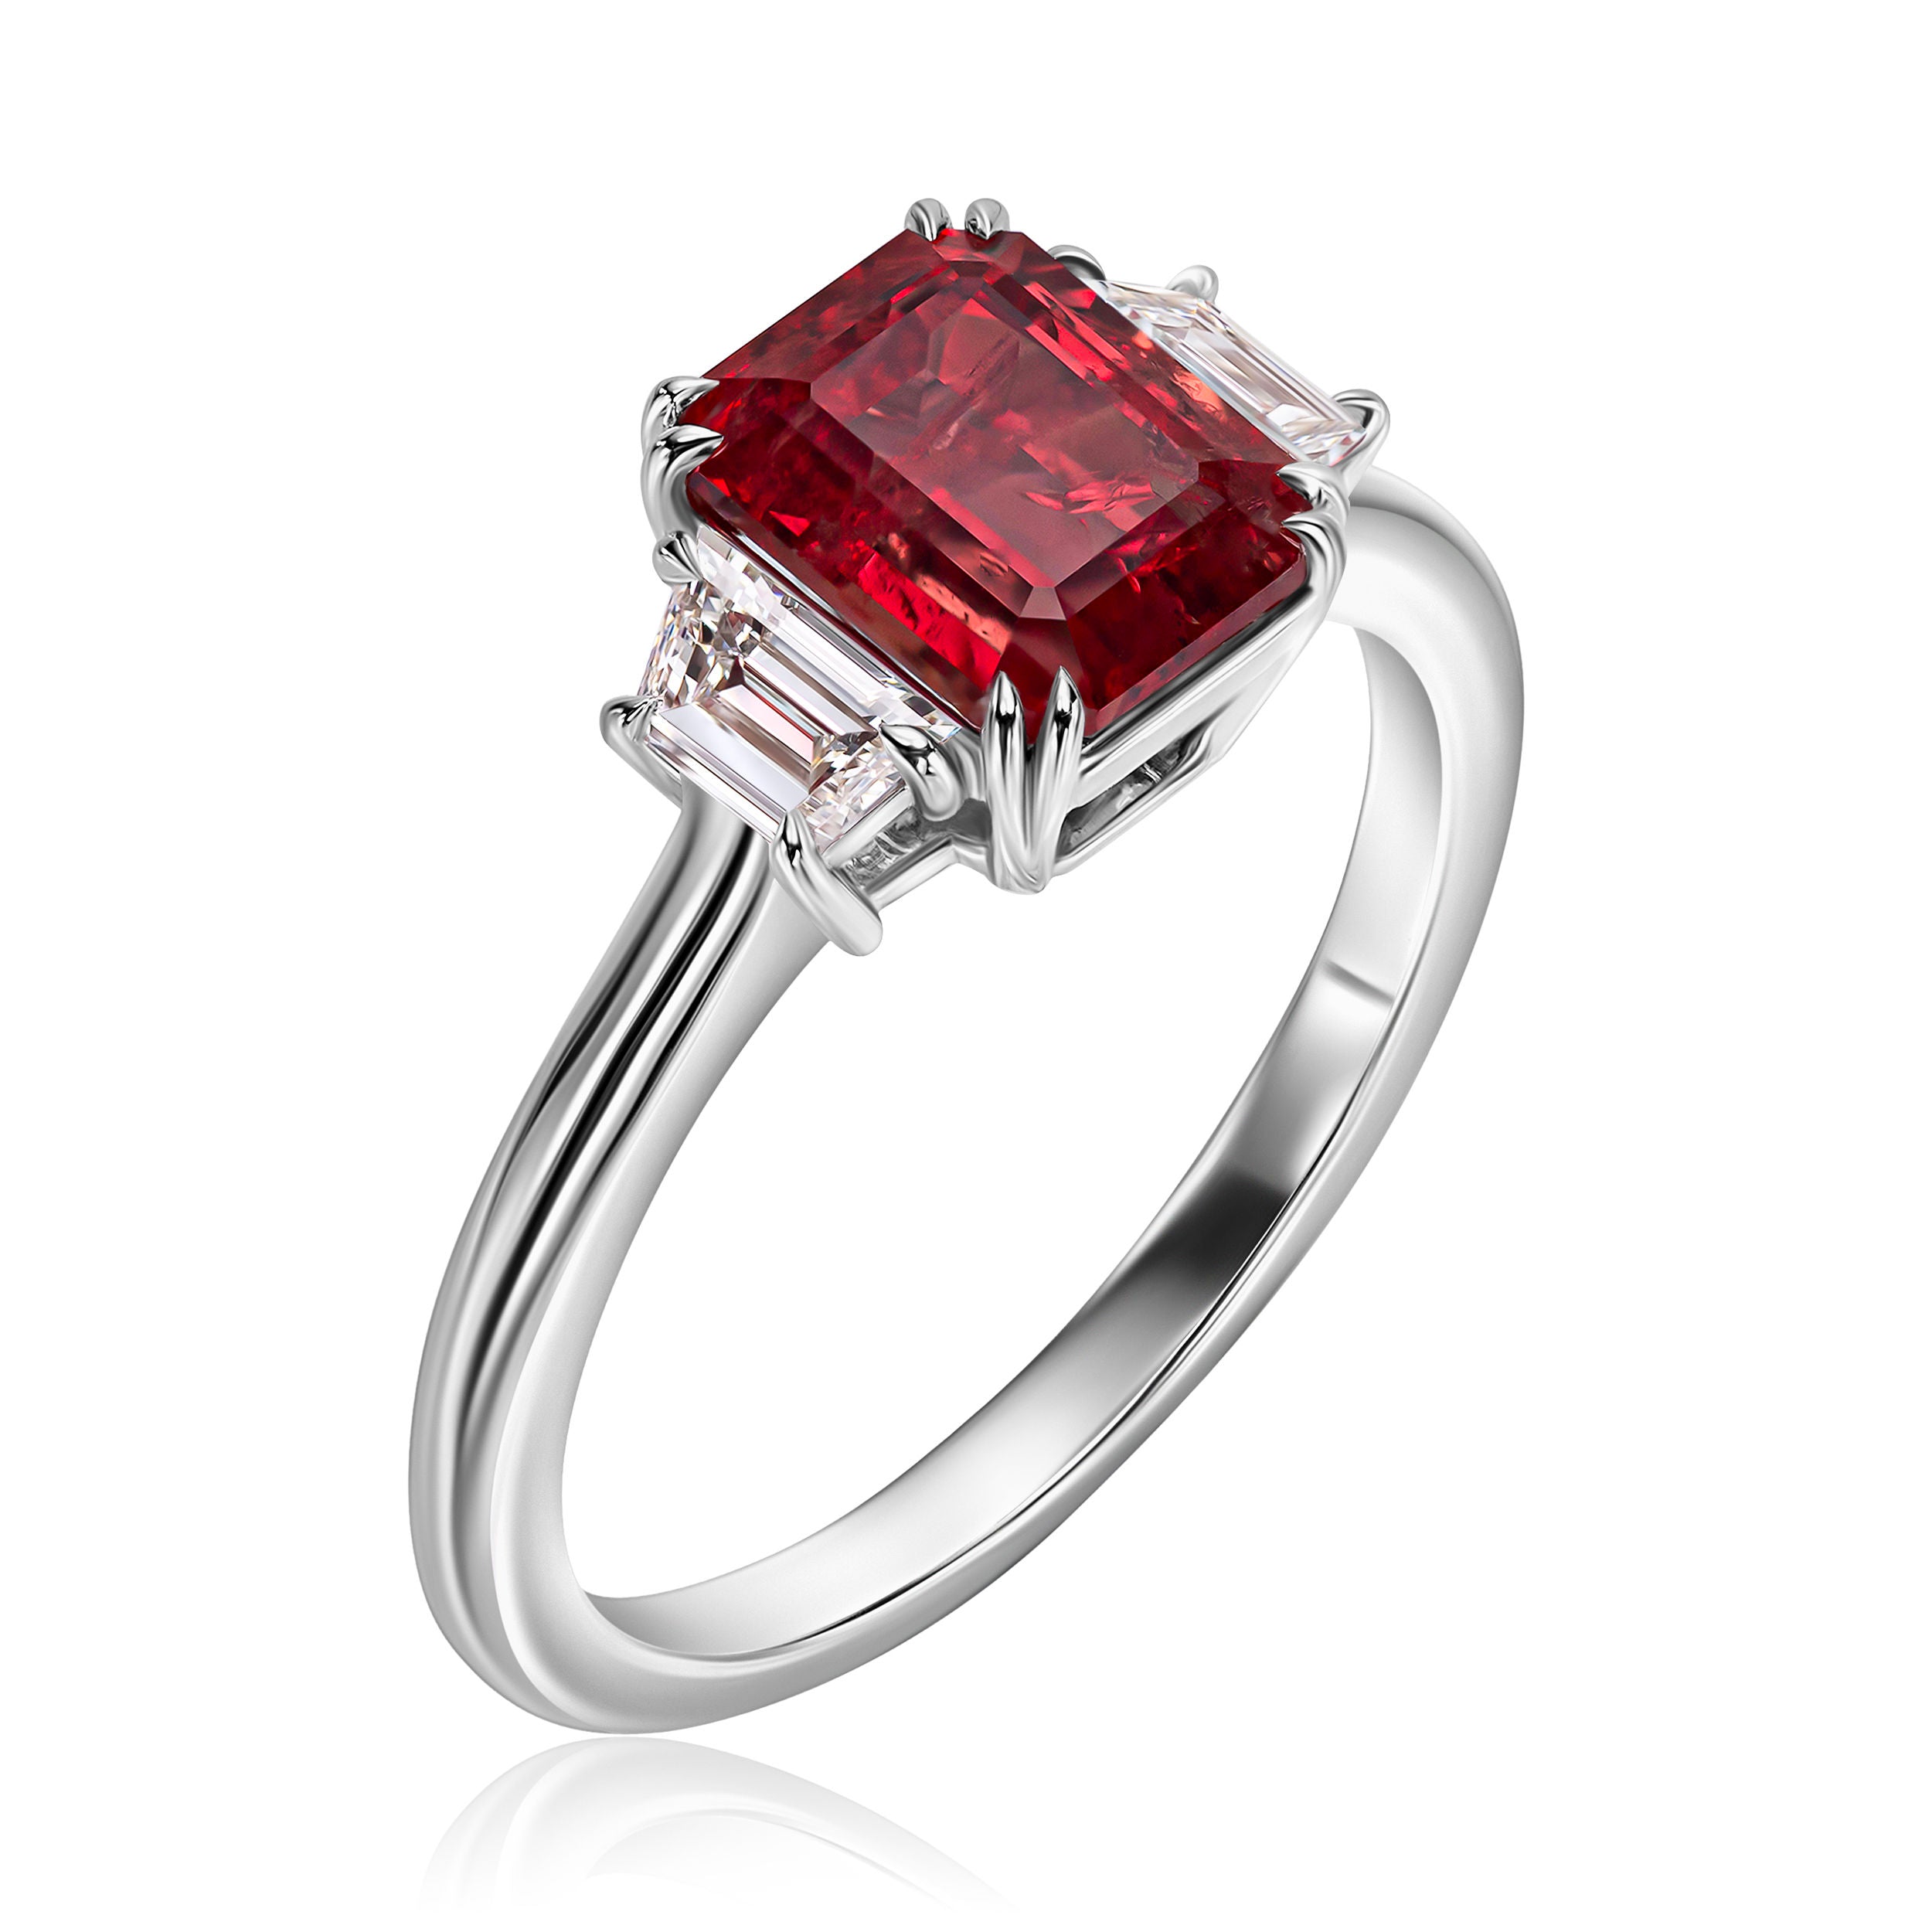 Emerald Cut Ruby Ring with Trapezoid - 3.11 TW